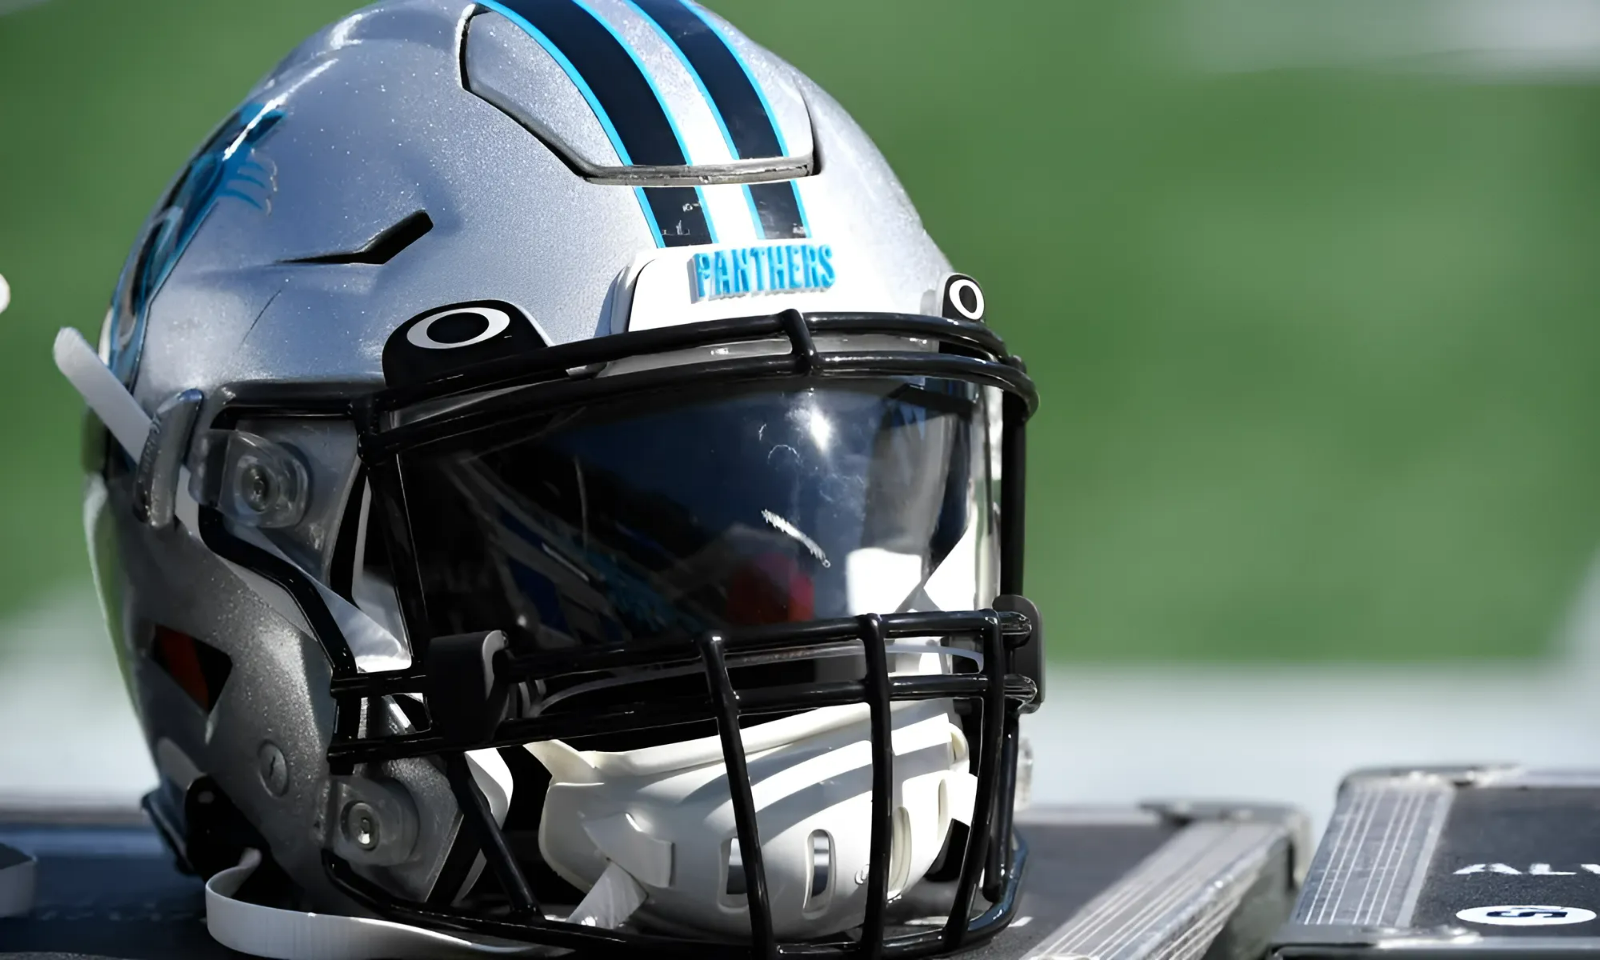 Panthers reportedly plan to hire former PFF writer in analytics role